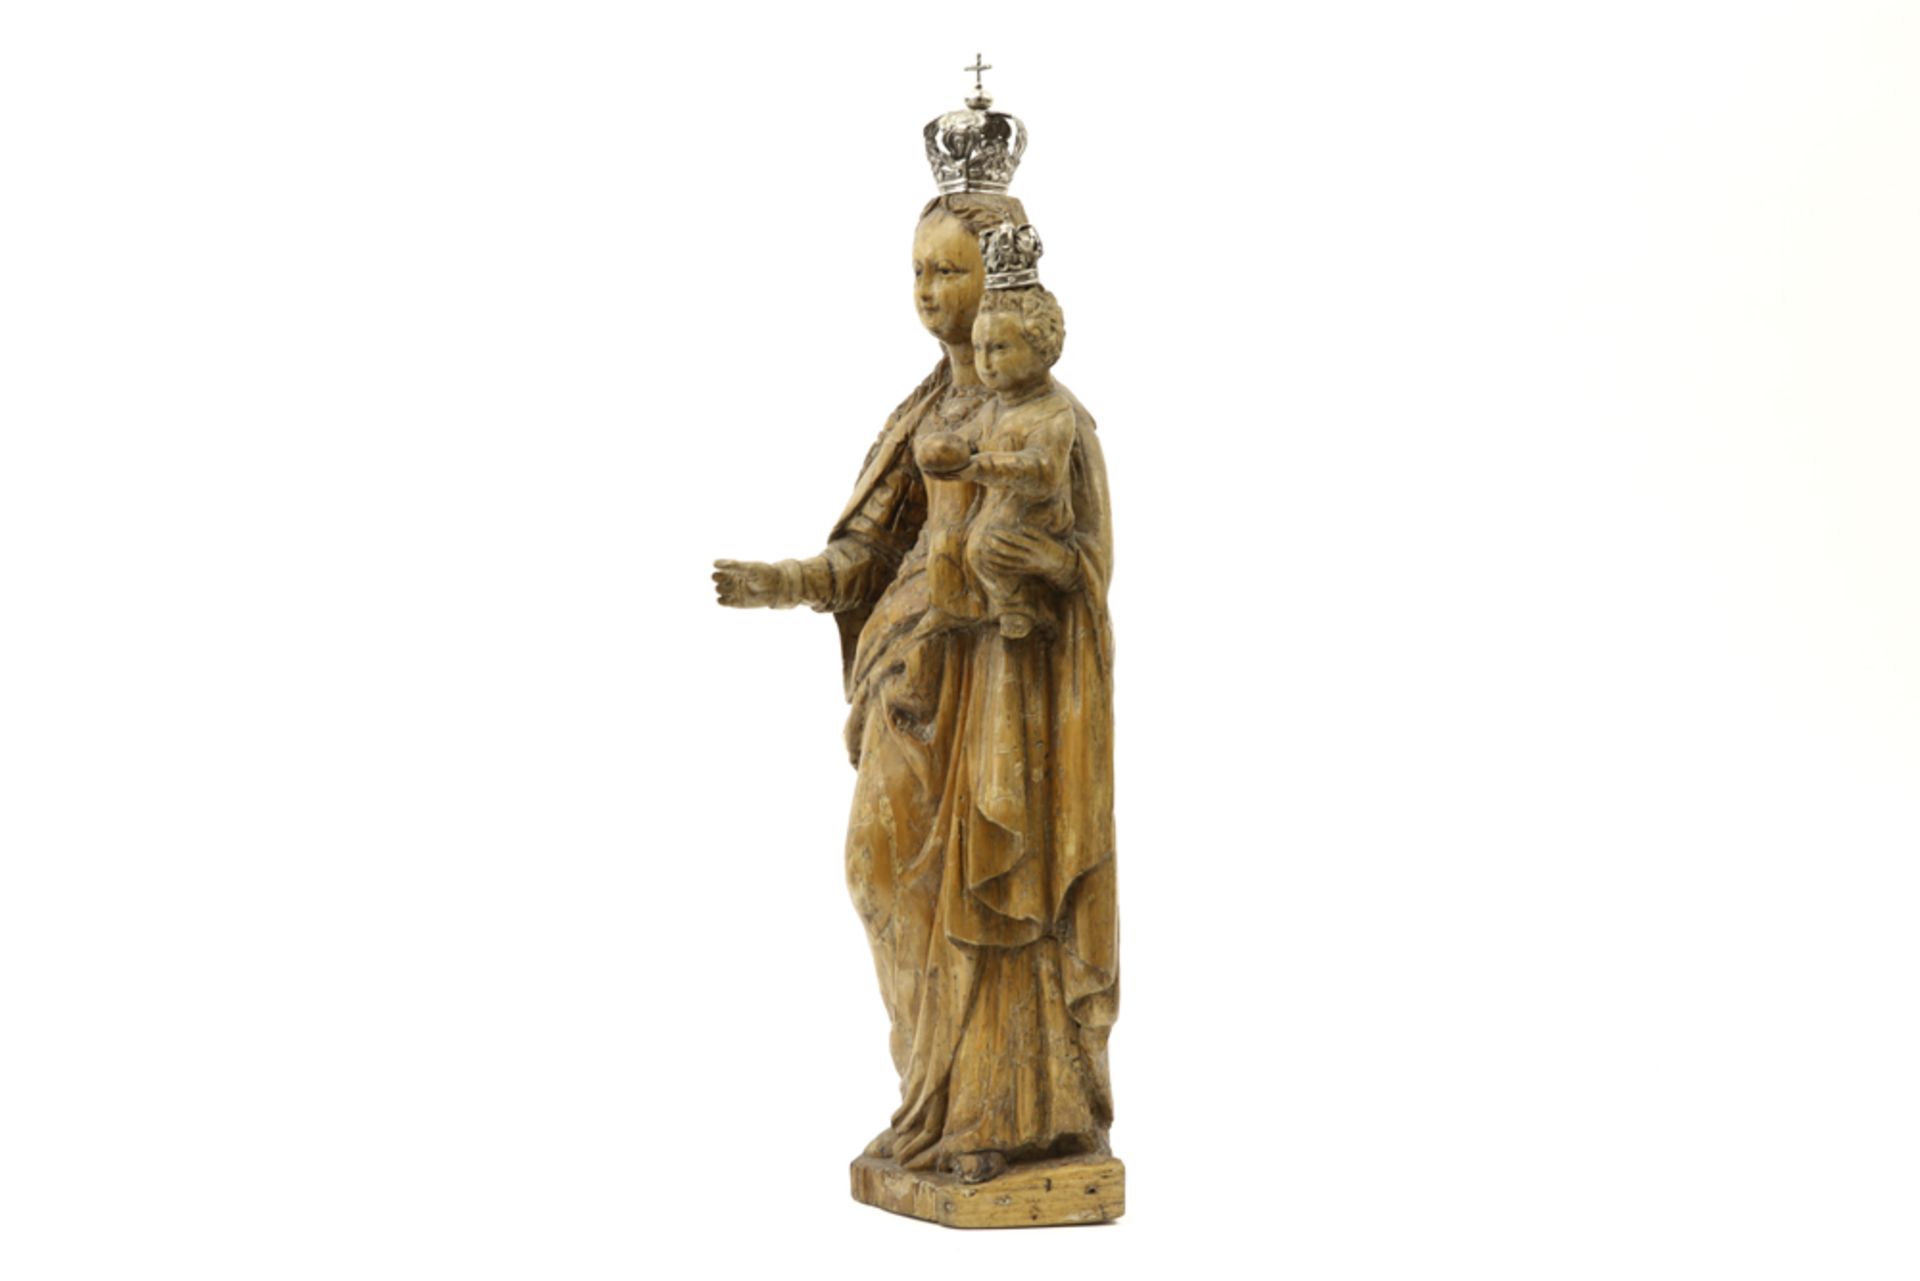 16th/17th Cent. Flemish "Holy Mary with Child" sculpture from Malines - with two silver crowns || - Bild 3 aus 4